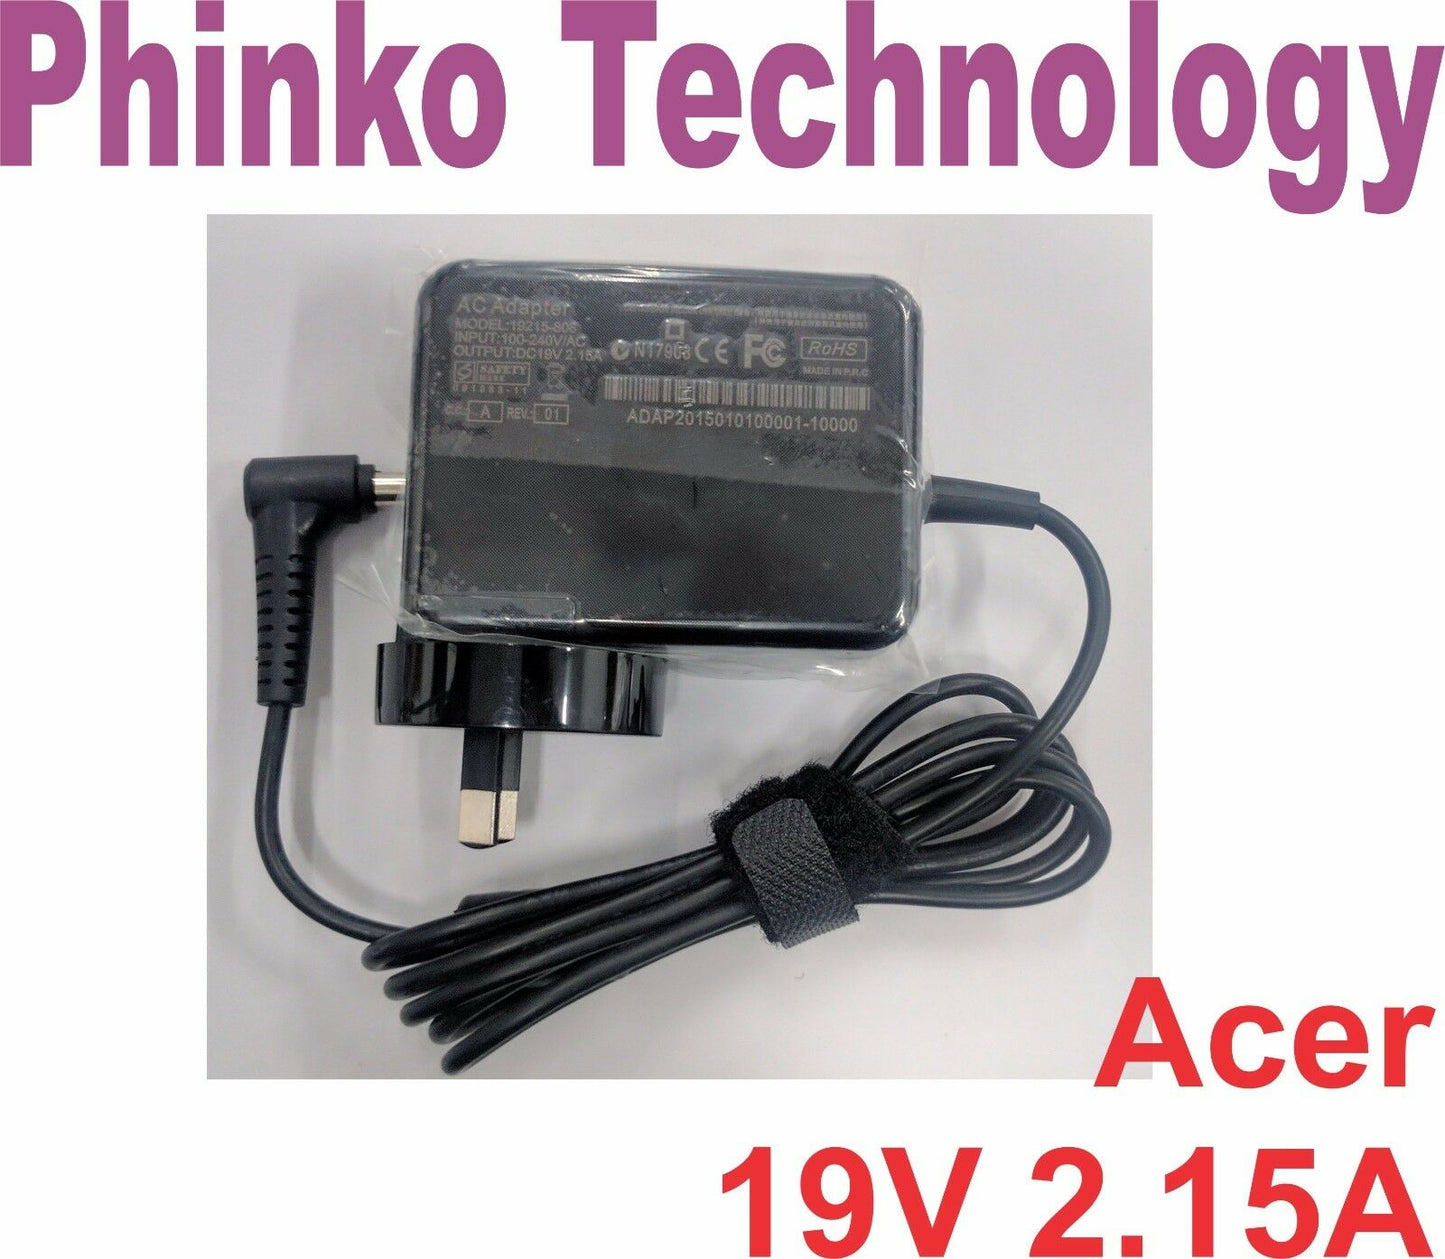 Replacement Original Adapter Charger for ACER 19V 2.15A 40W 5.5x1.7mm